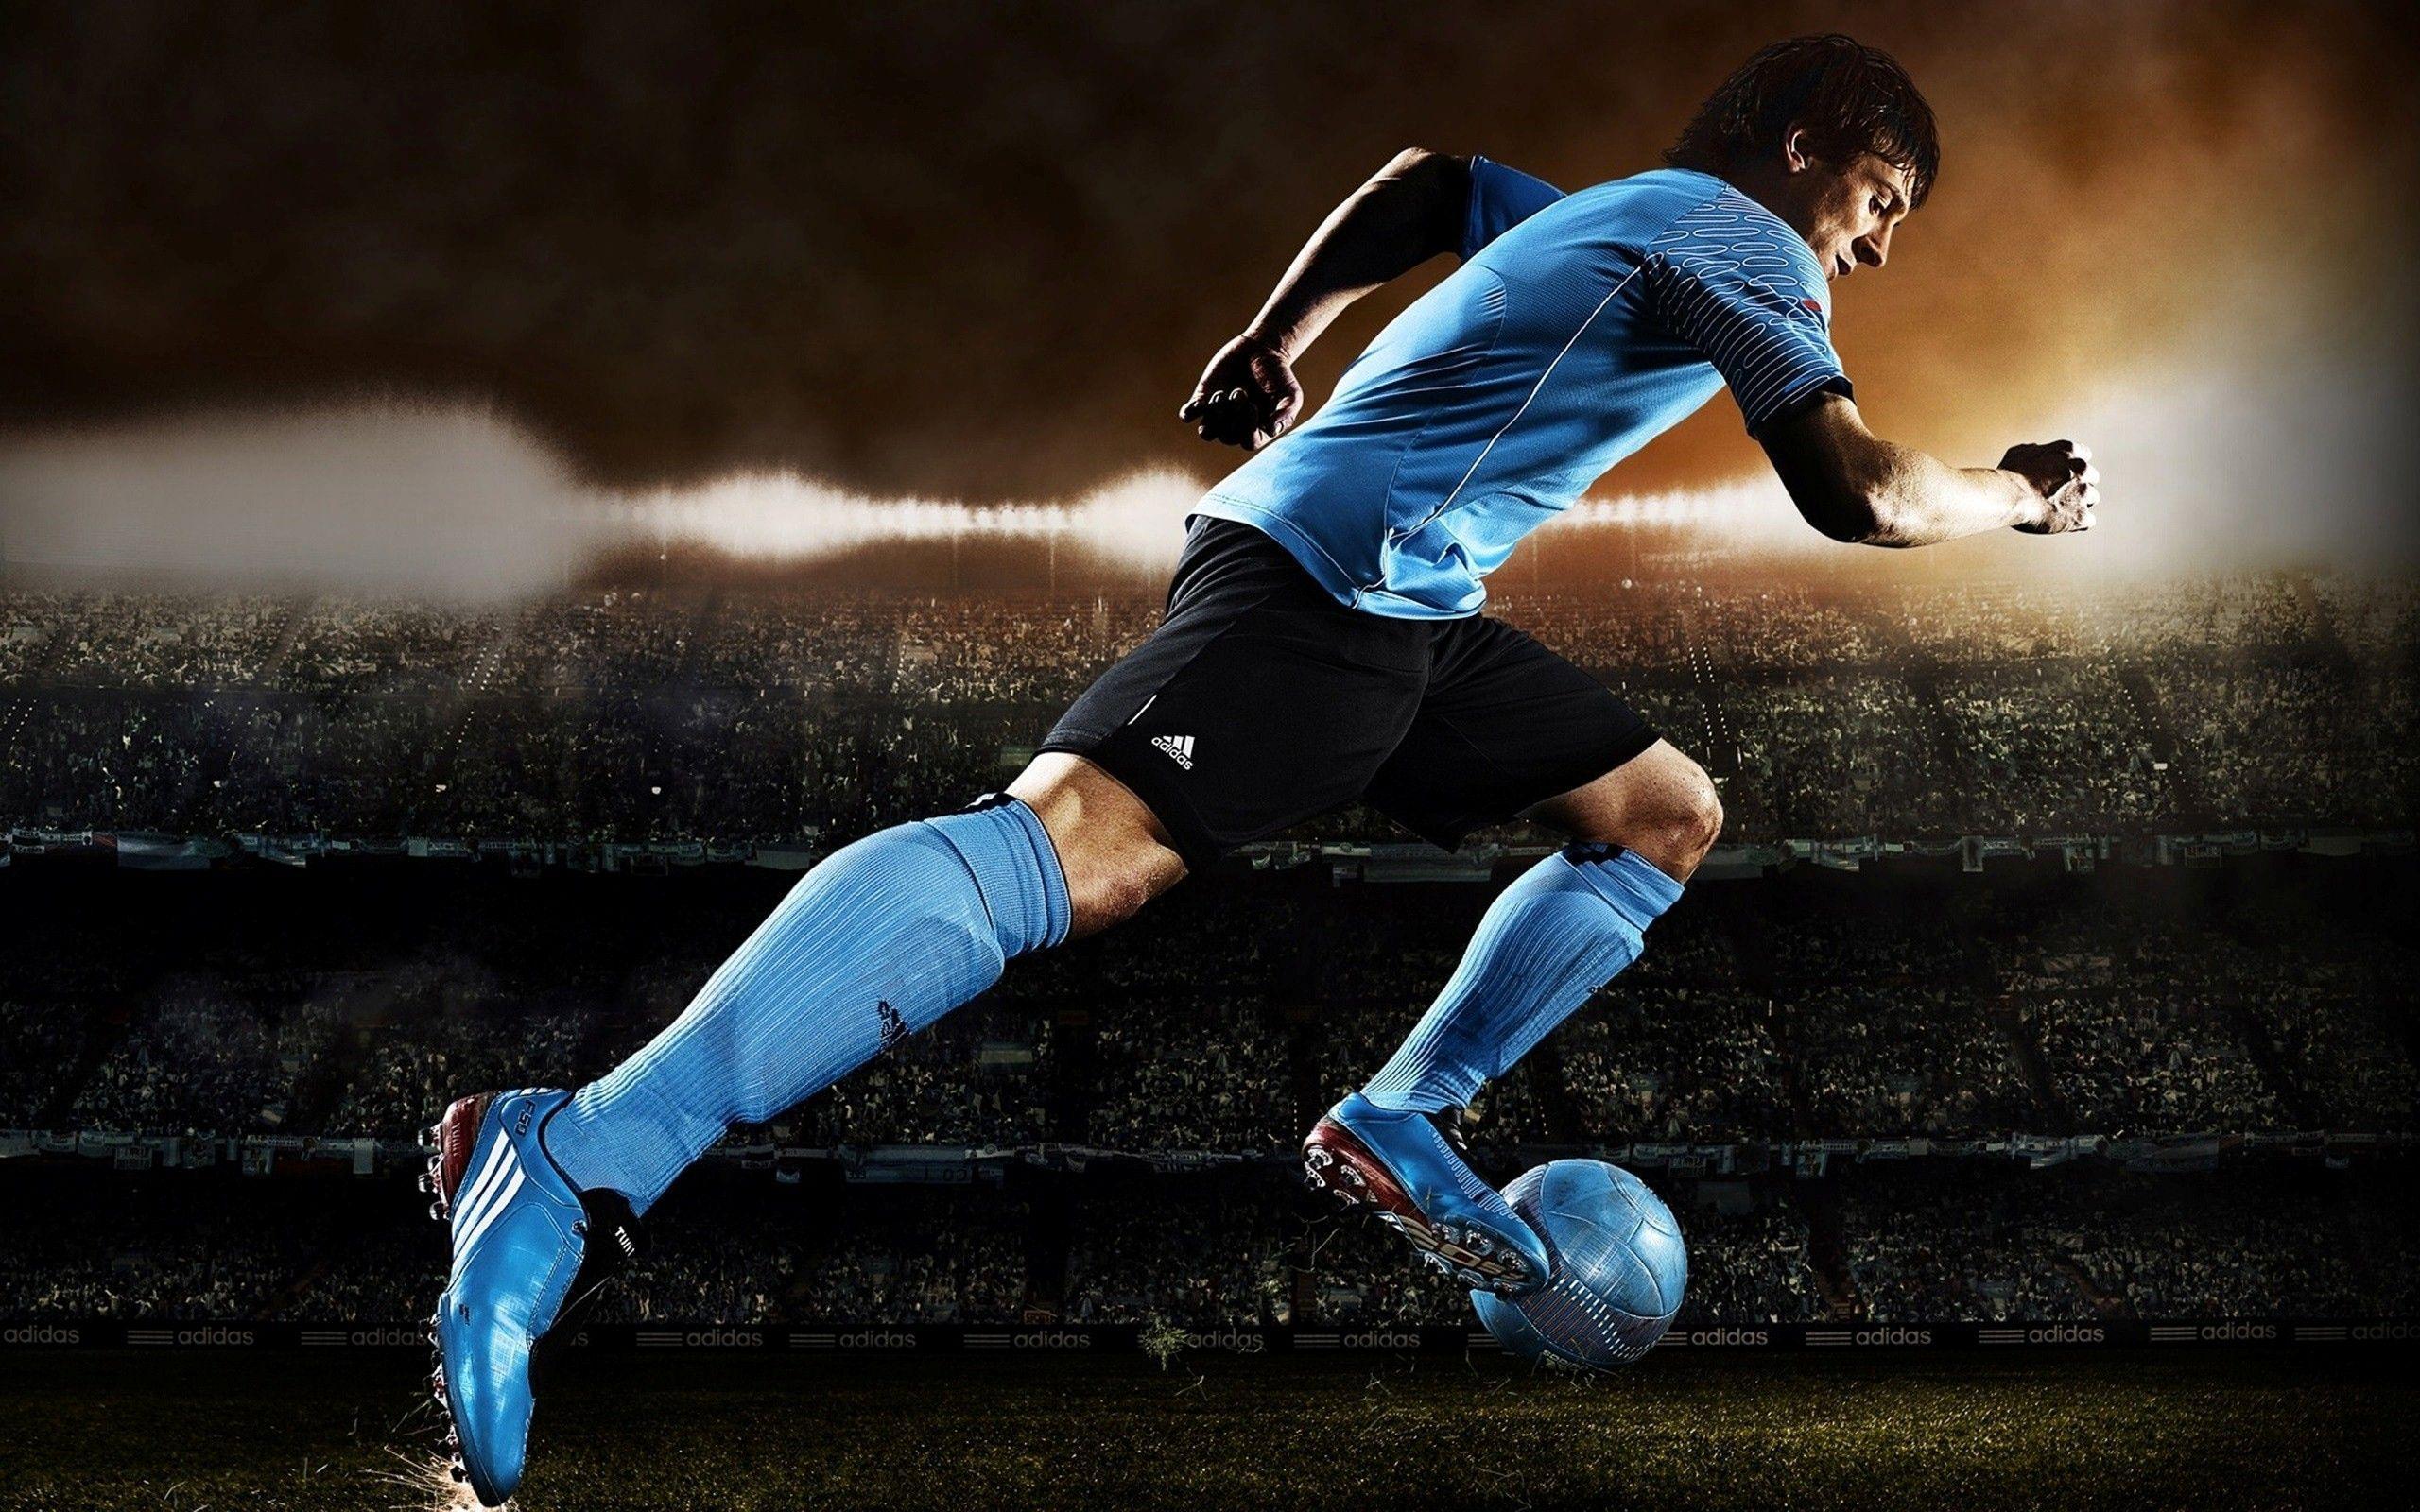 Football Wallpaper. Free Download HD New Latest Sports Player Image